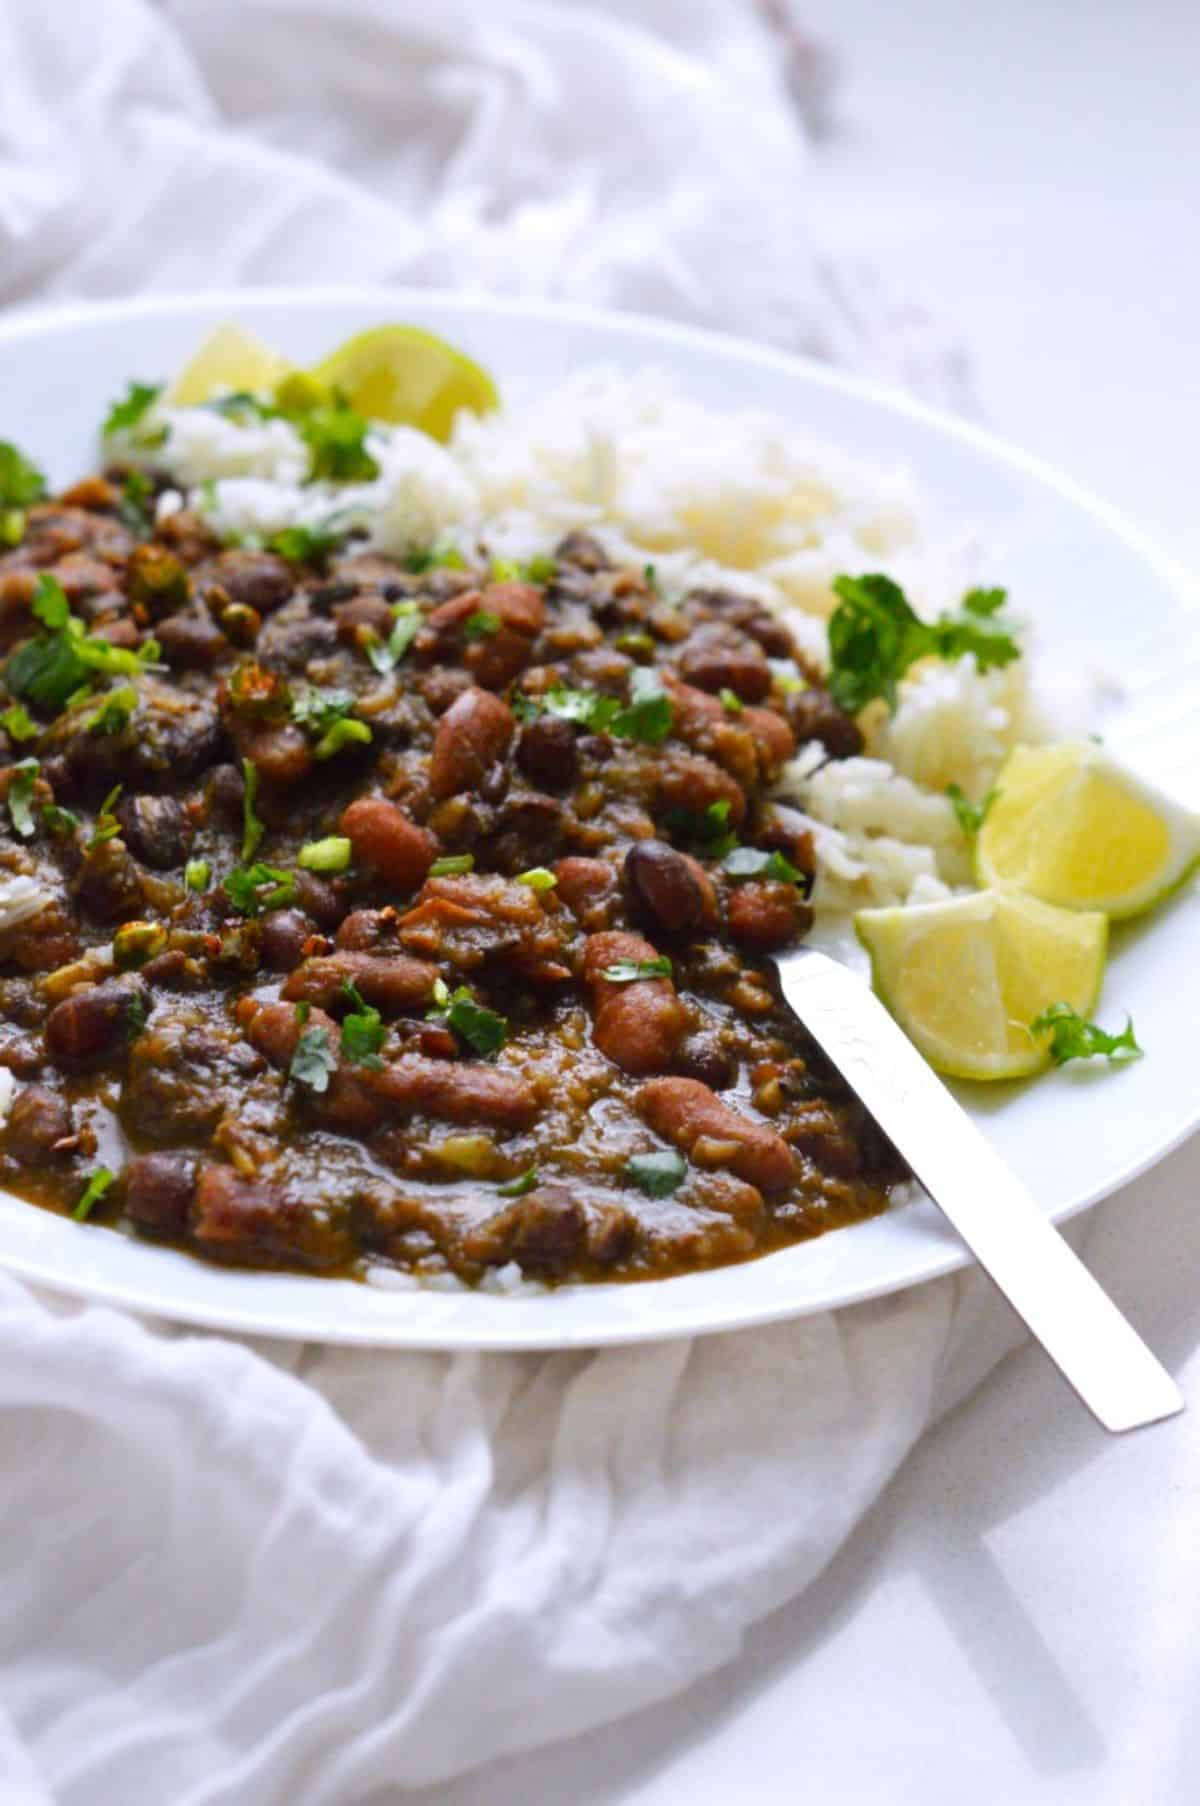 Madras Lentils dish on a white plate.